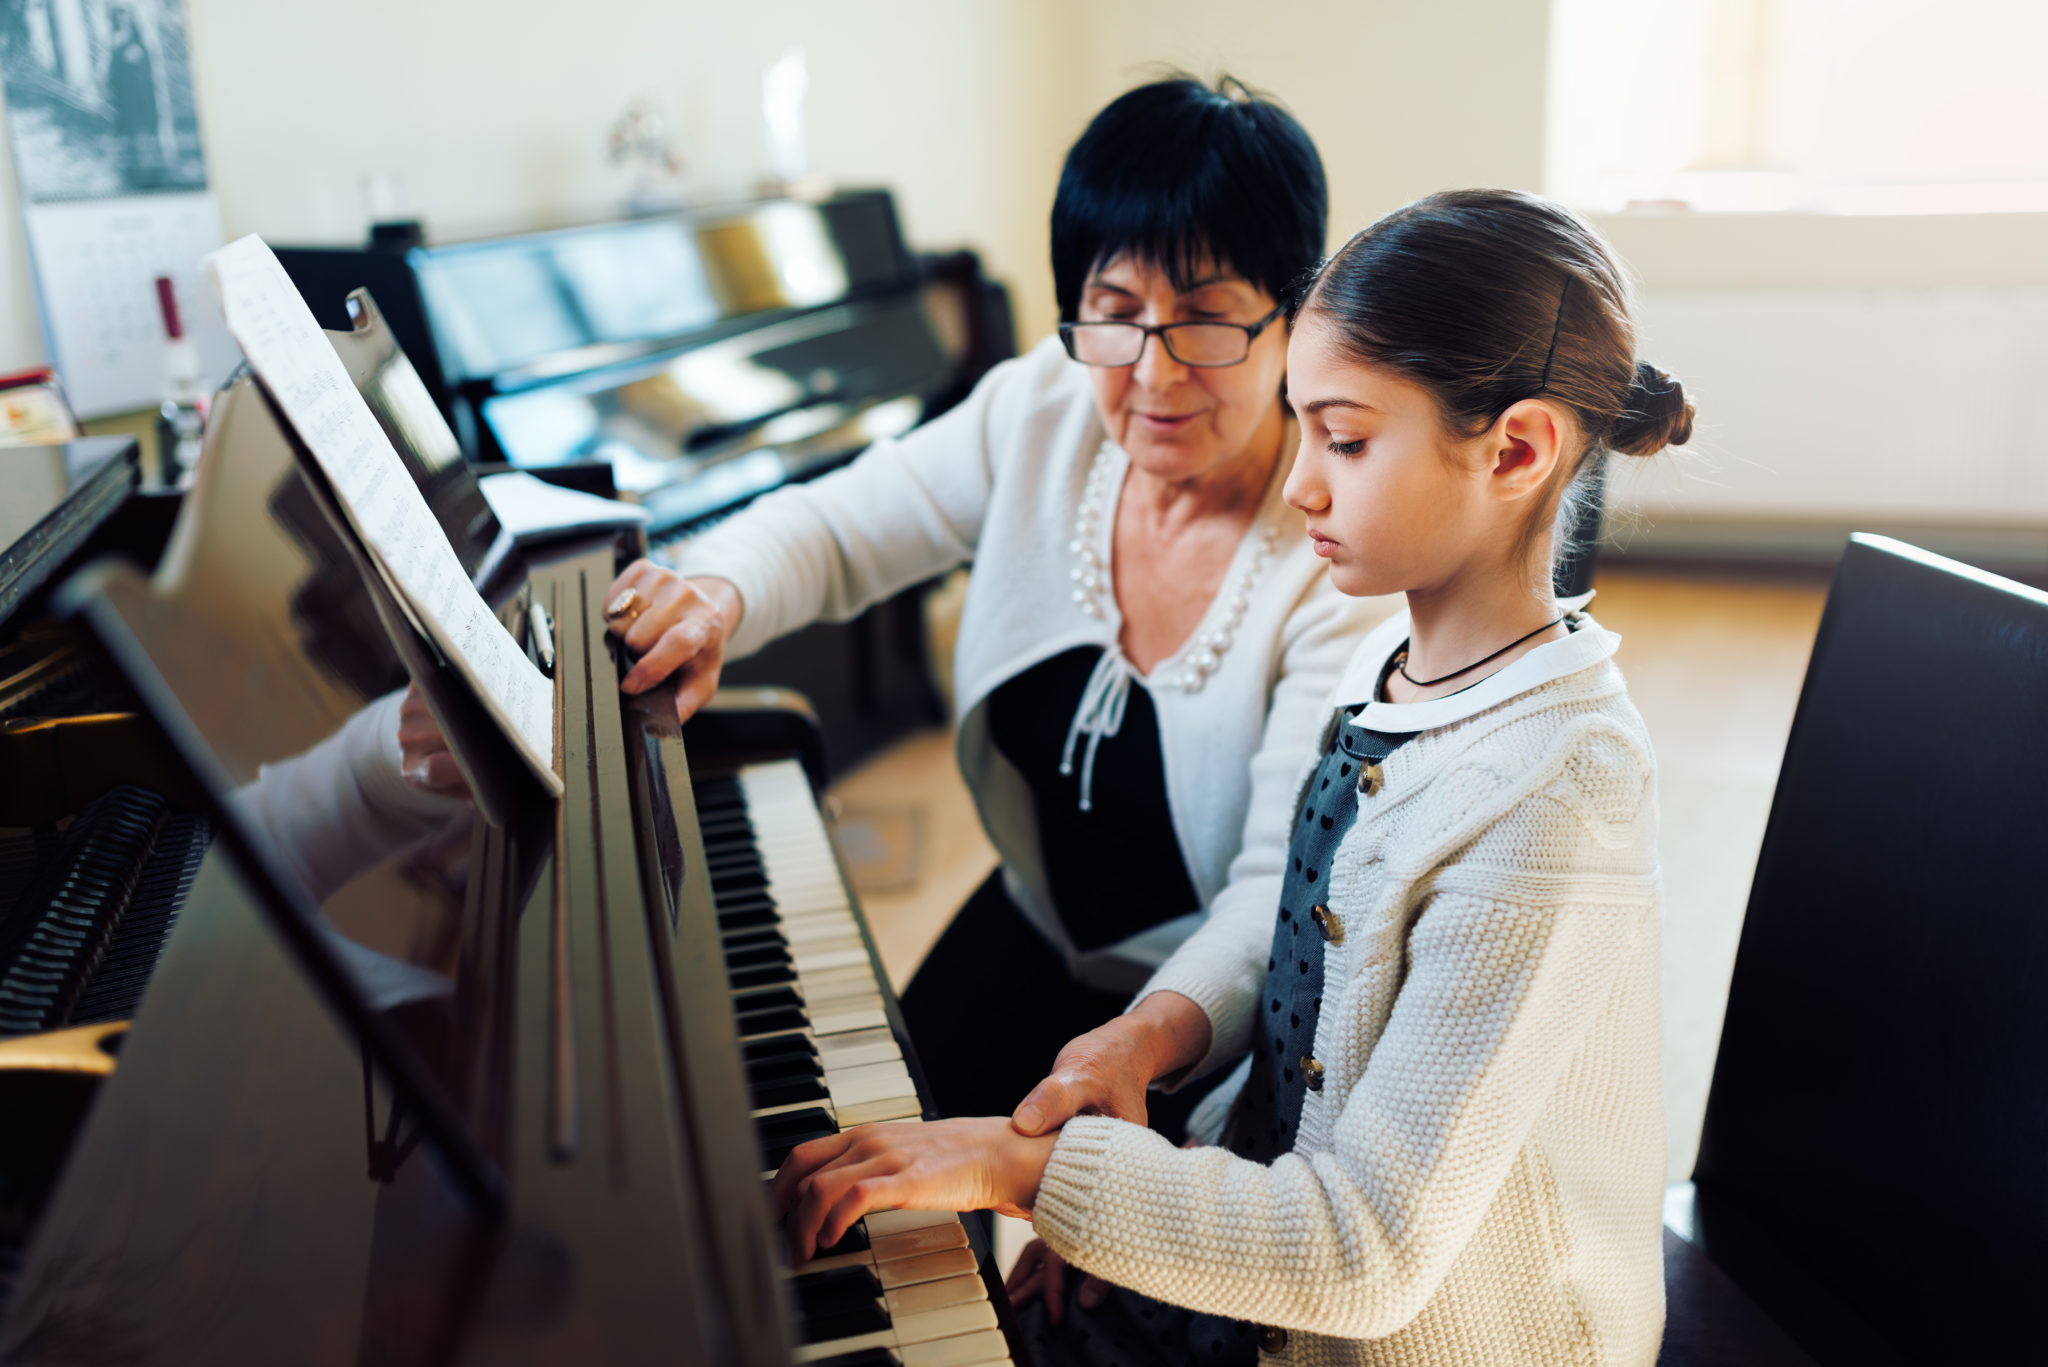 Can I Look At My Hands When Playing Piano? - Hoffman Academy Blog